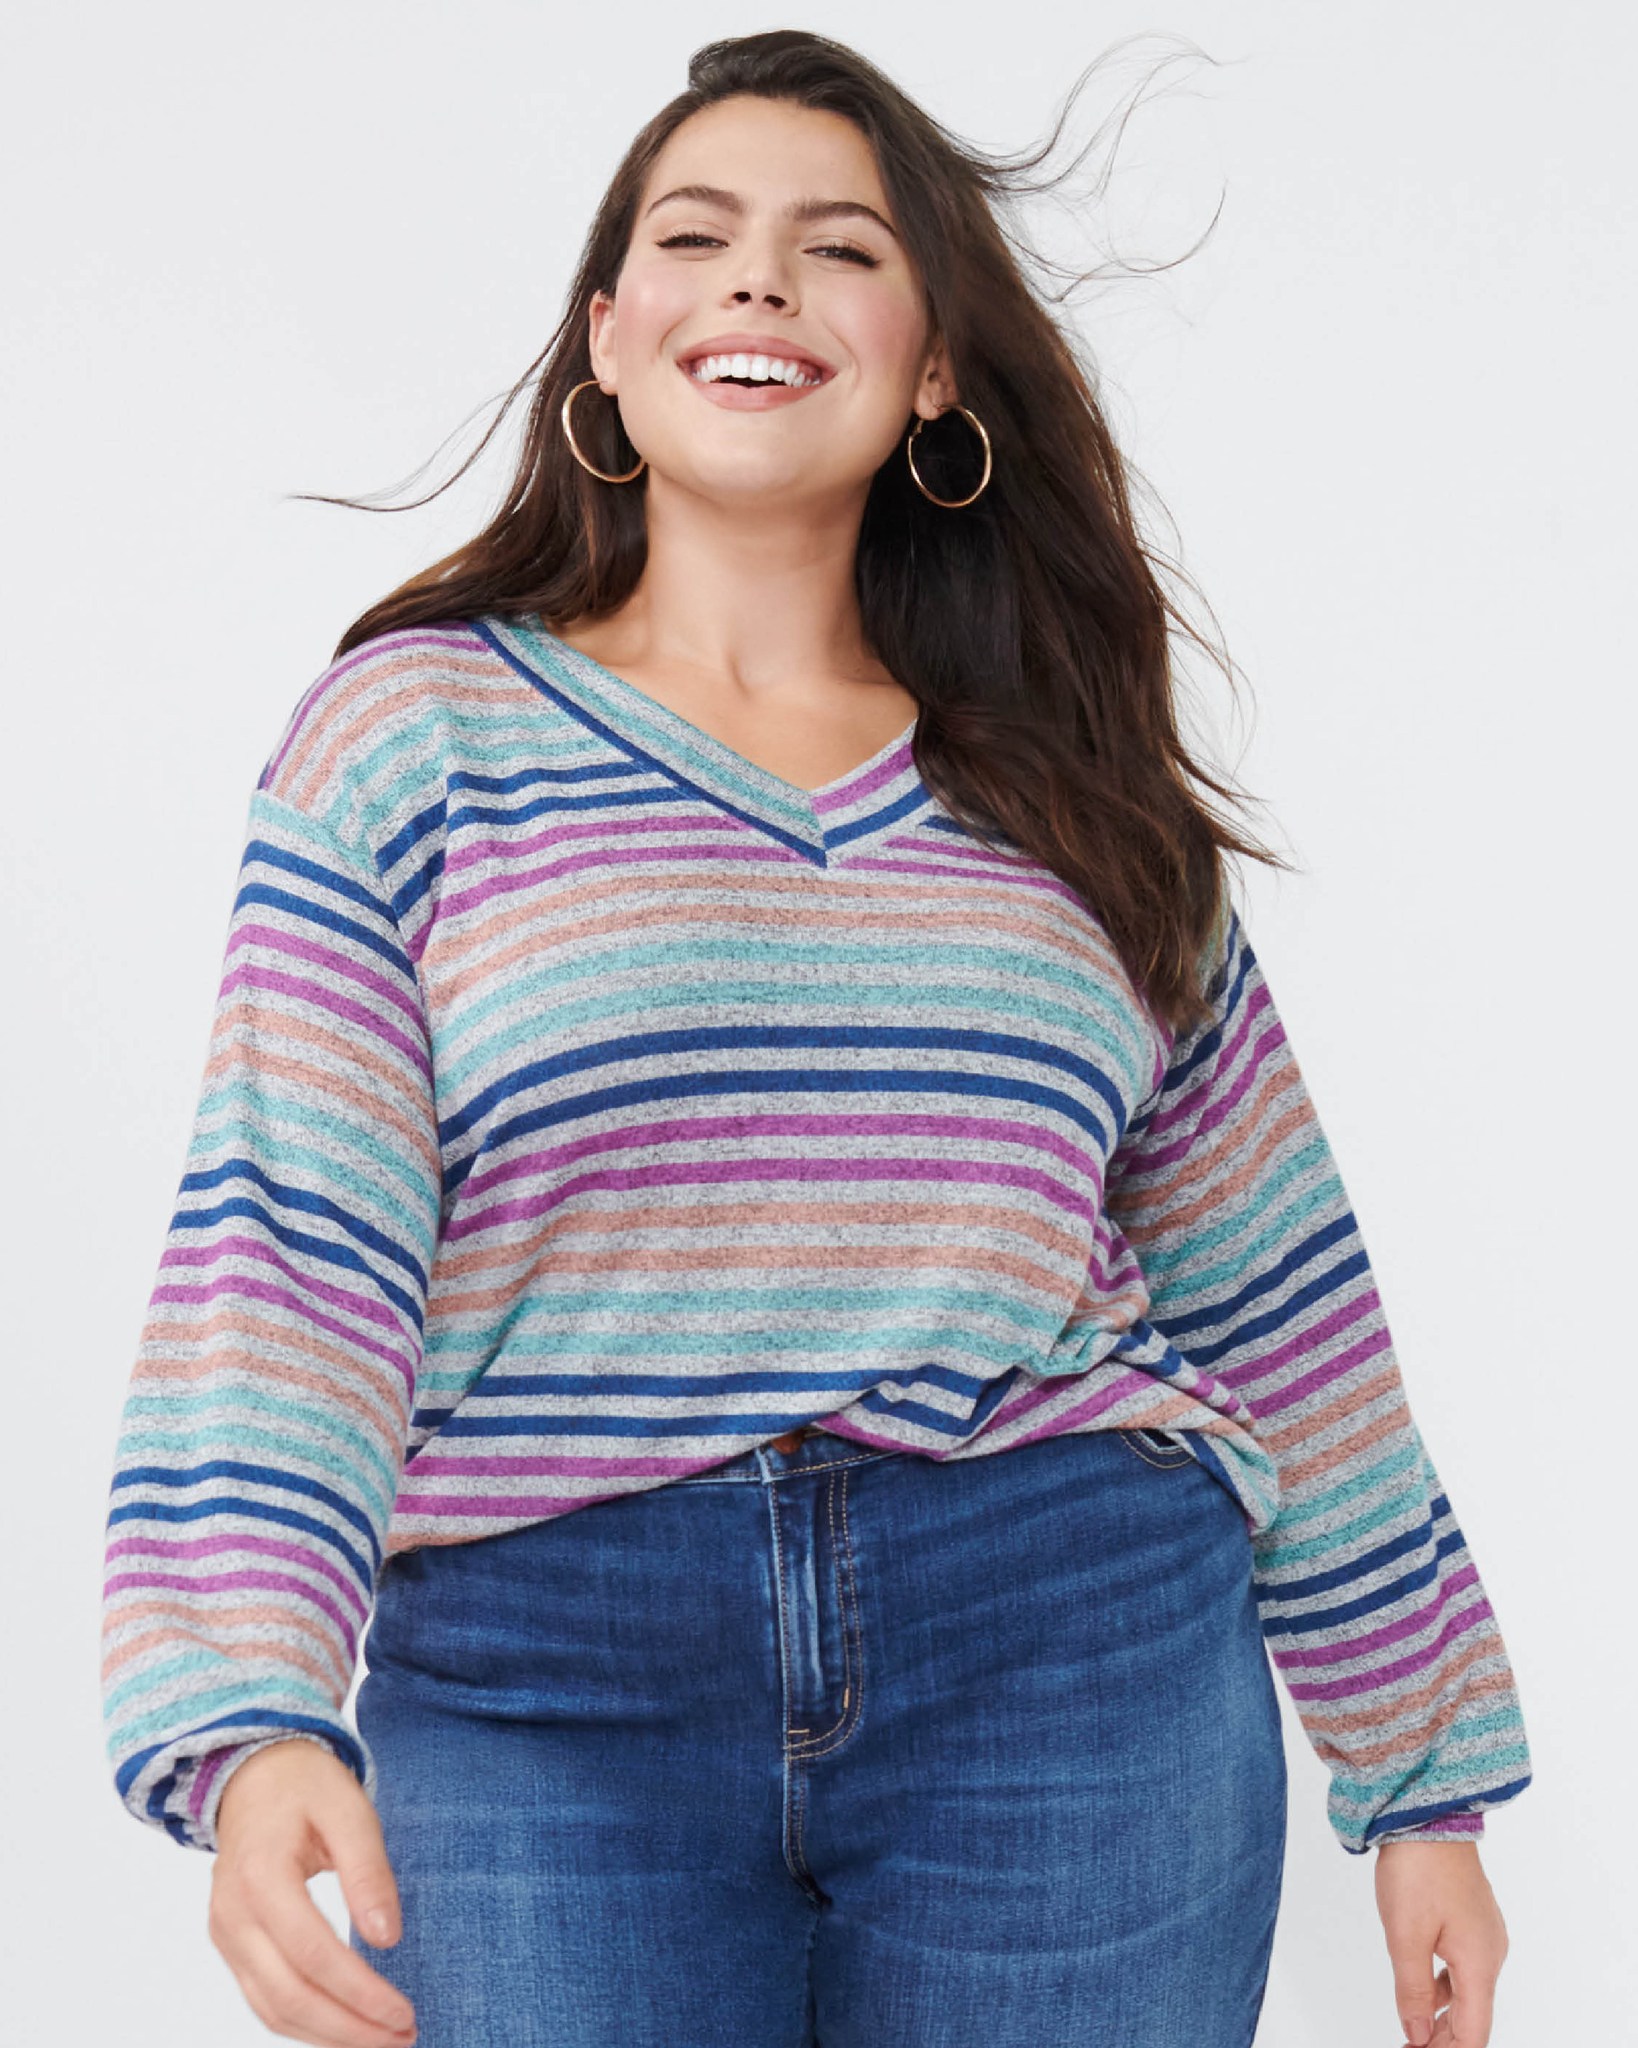 Plus Size Jeans Get A Stylish Makeover At Lane Bryant